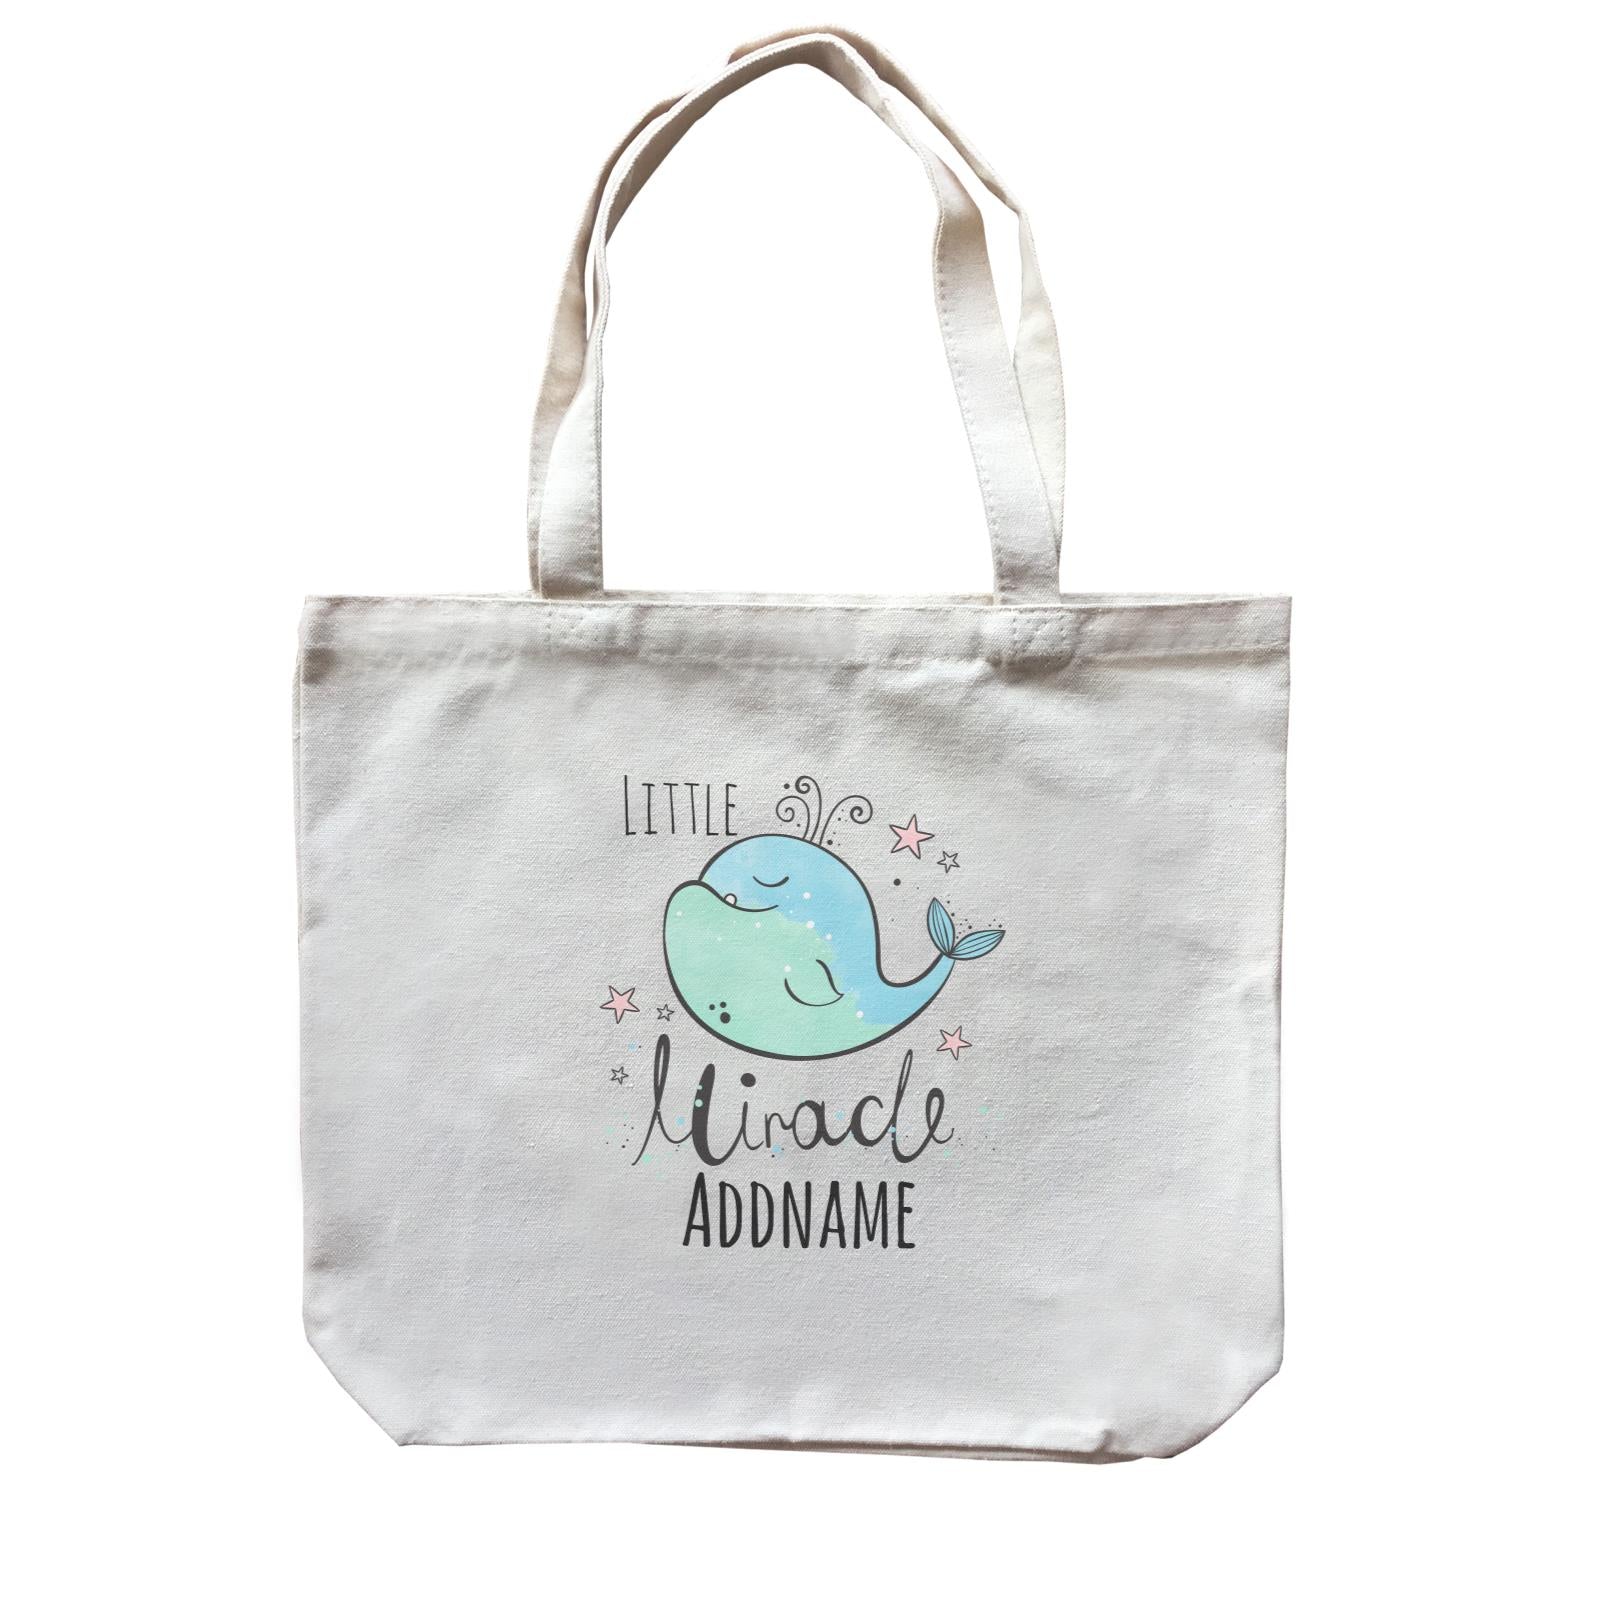 Drawn Ocean Elements Little Miracle Whale Addname Canvas Bag